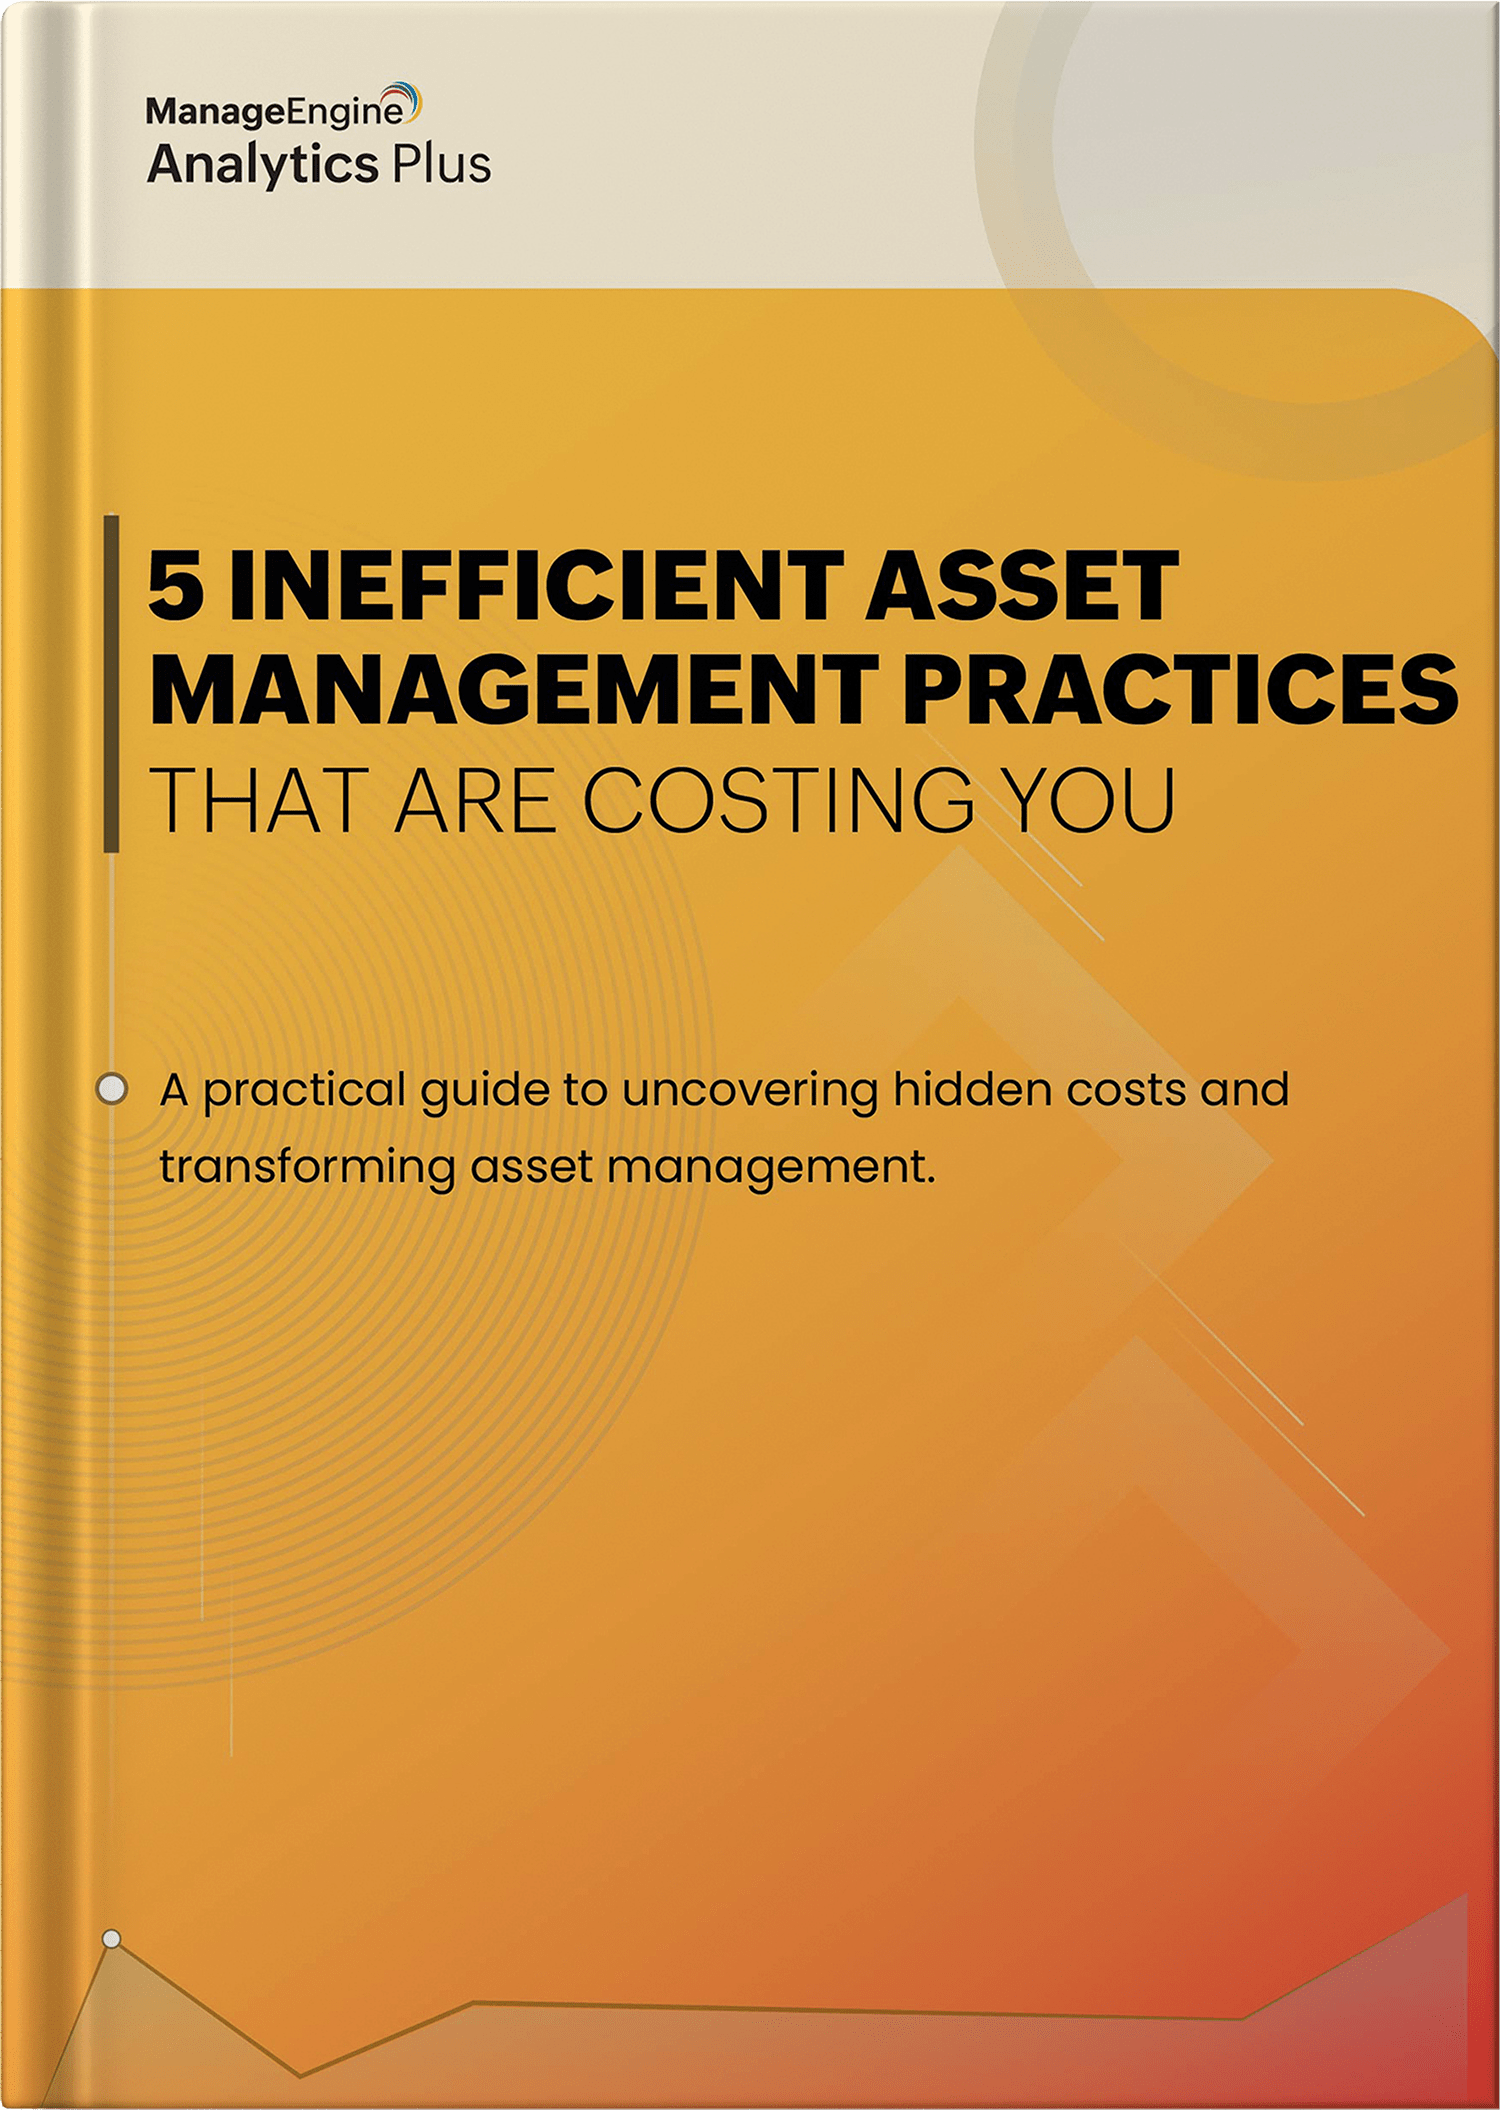 5 inefficient asset management practices that are costing you